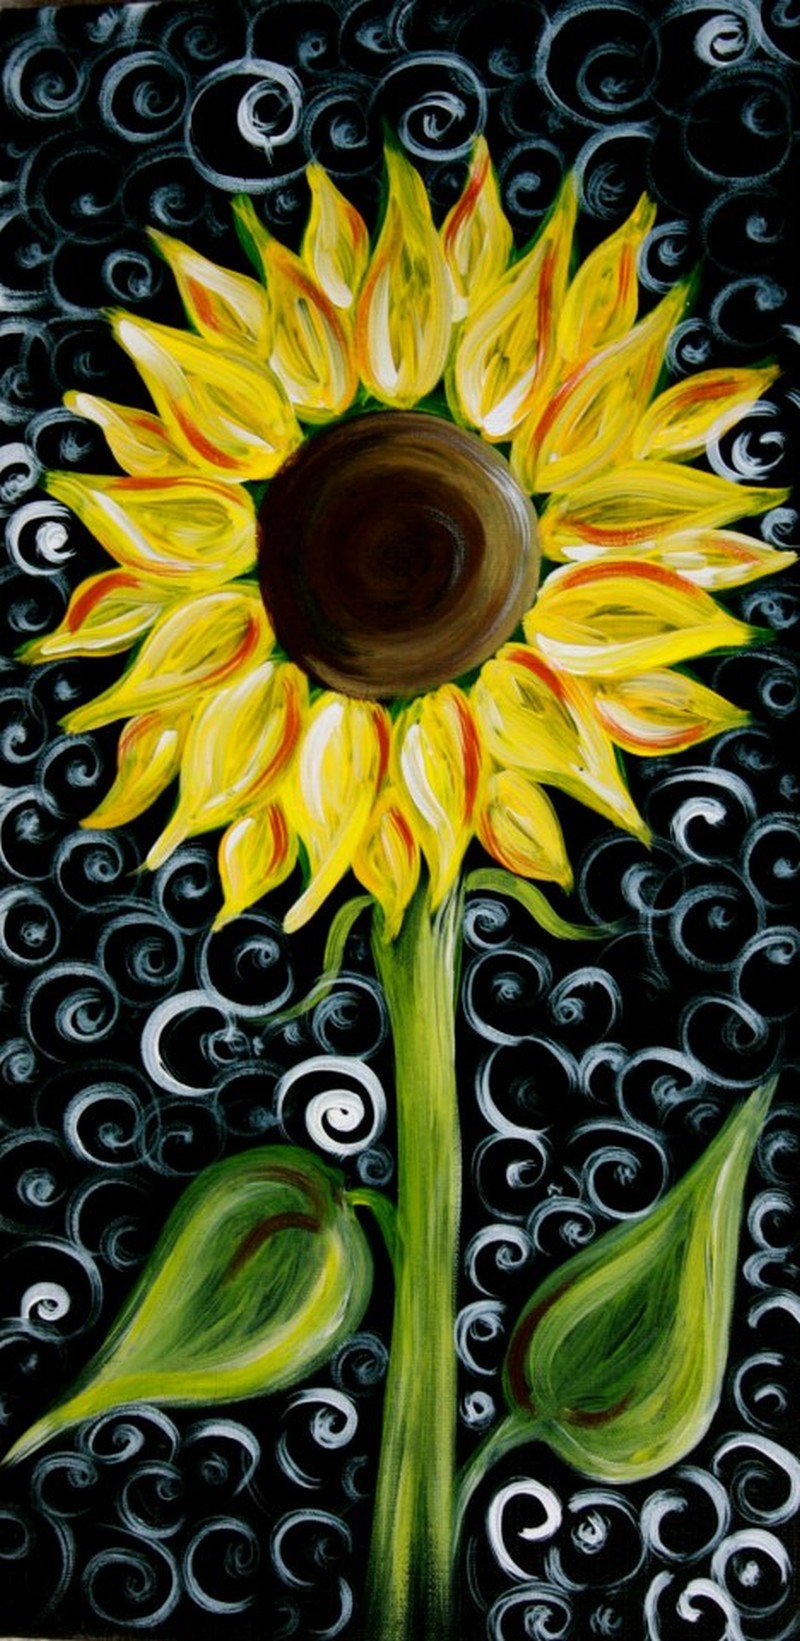 $29 Tuesday! Swirly Sunflower - In Studio pARTy